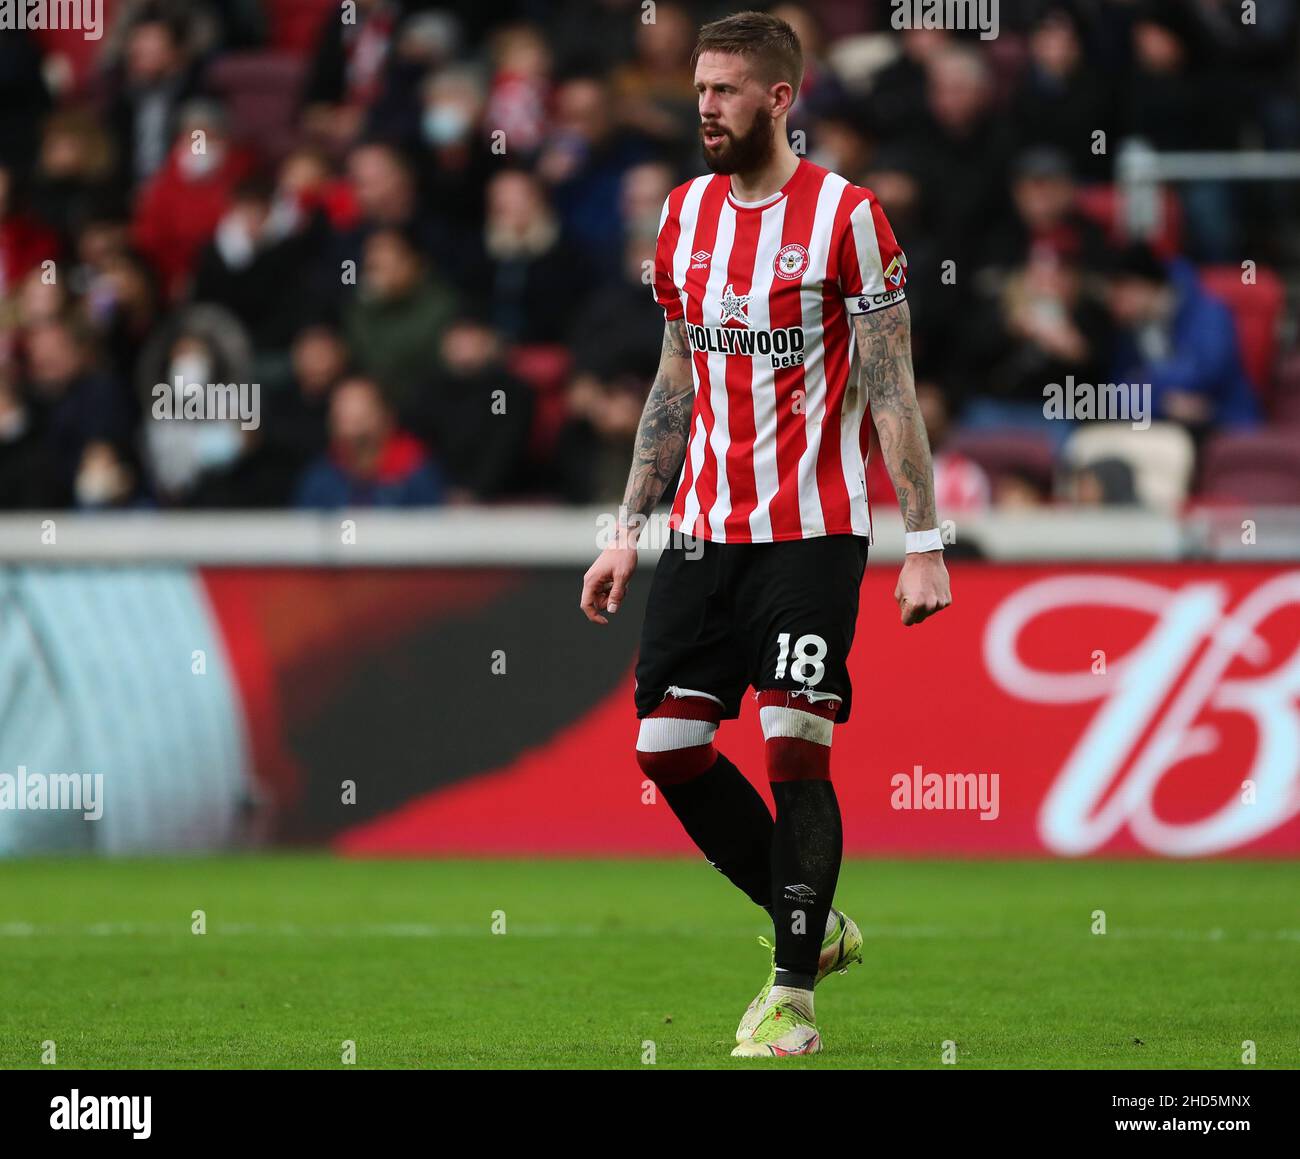 BRENTFORD, ENGLAND - JANUARY 02: Pontus Jansson of Brentford during the Premier League match between Brentford and Aston Villa at Brentford Community Stadium on January 2, 2022 in Brentford, England. (Photo by Ben Peters/MB Media) Stock Photo